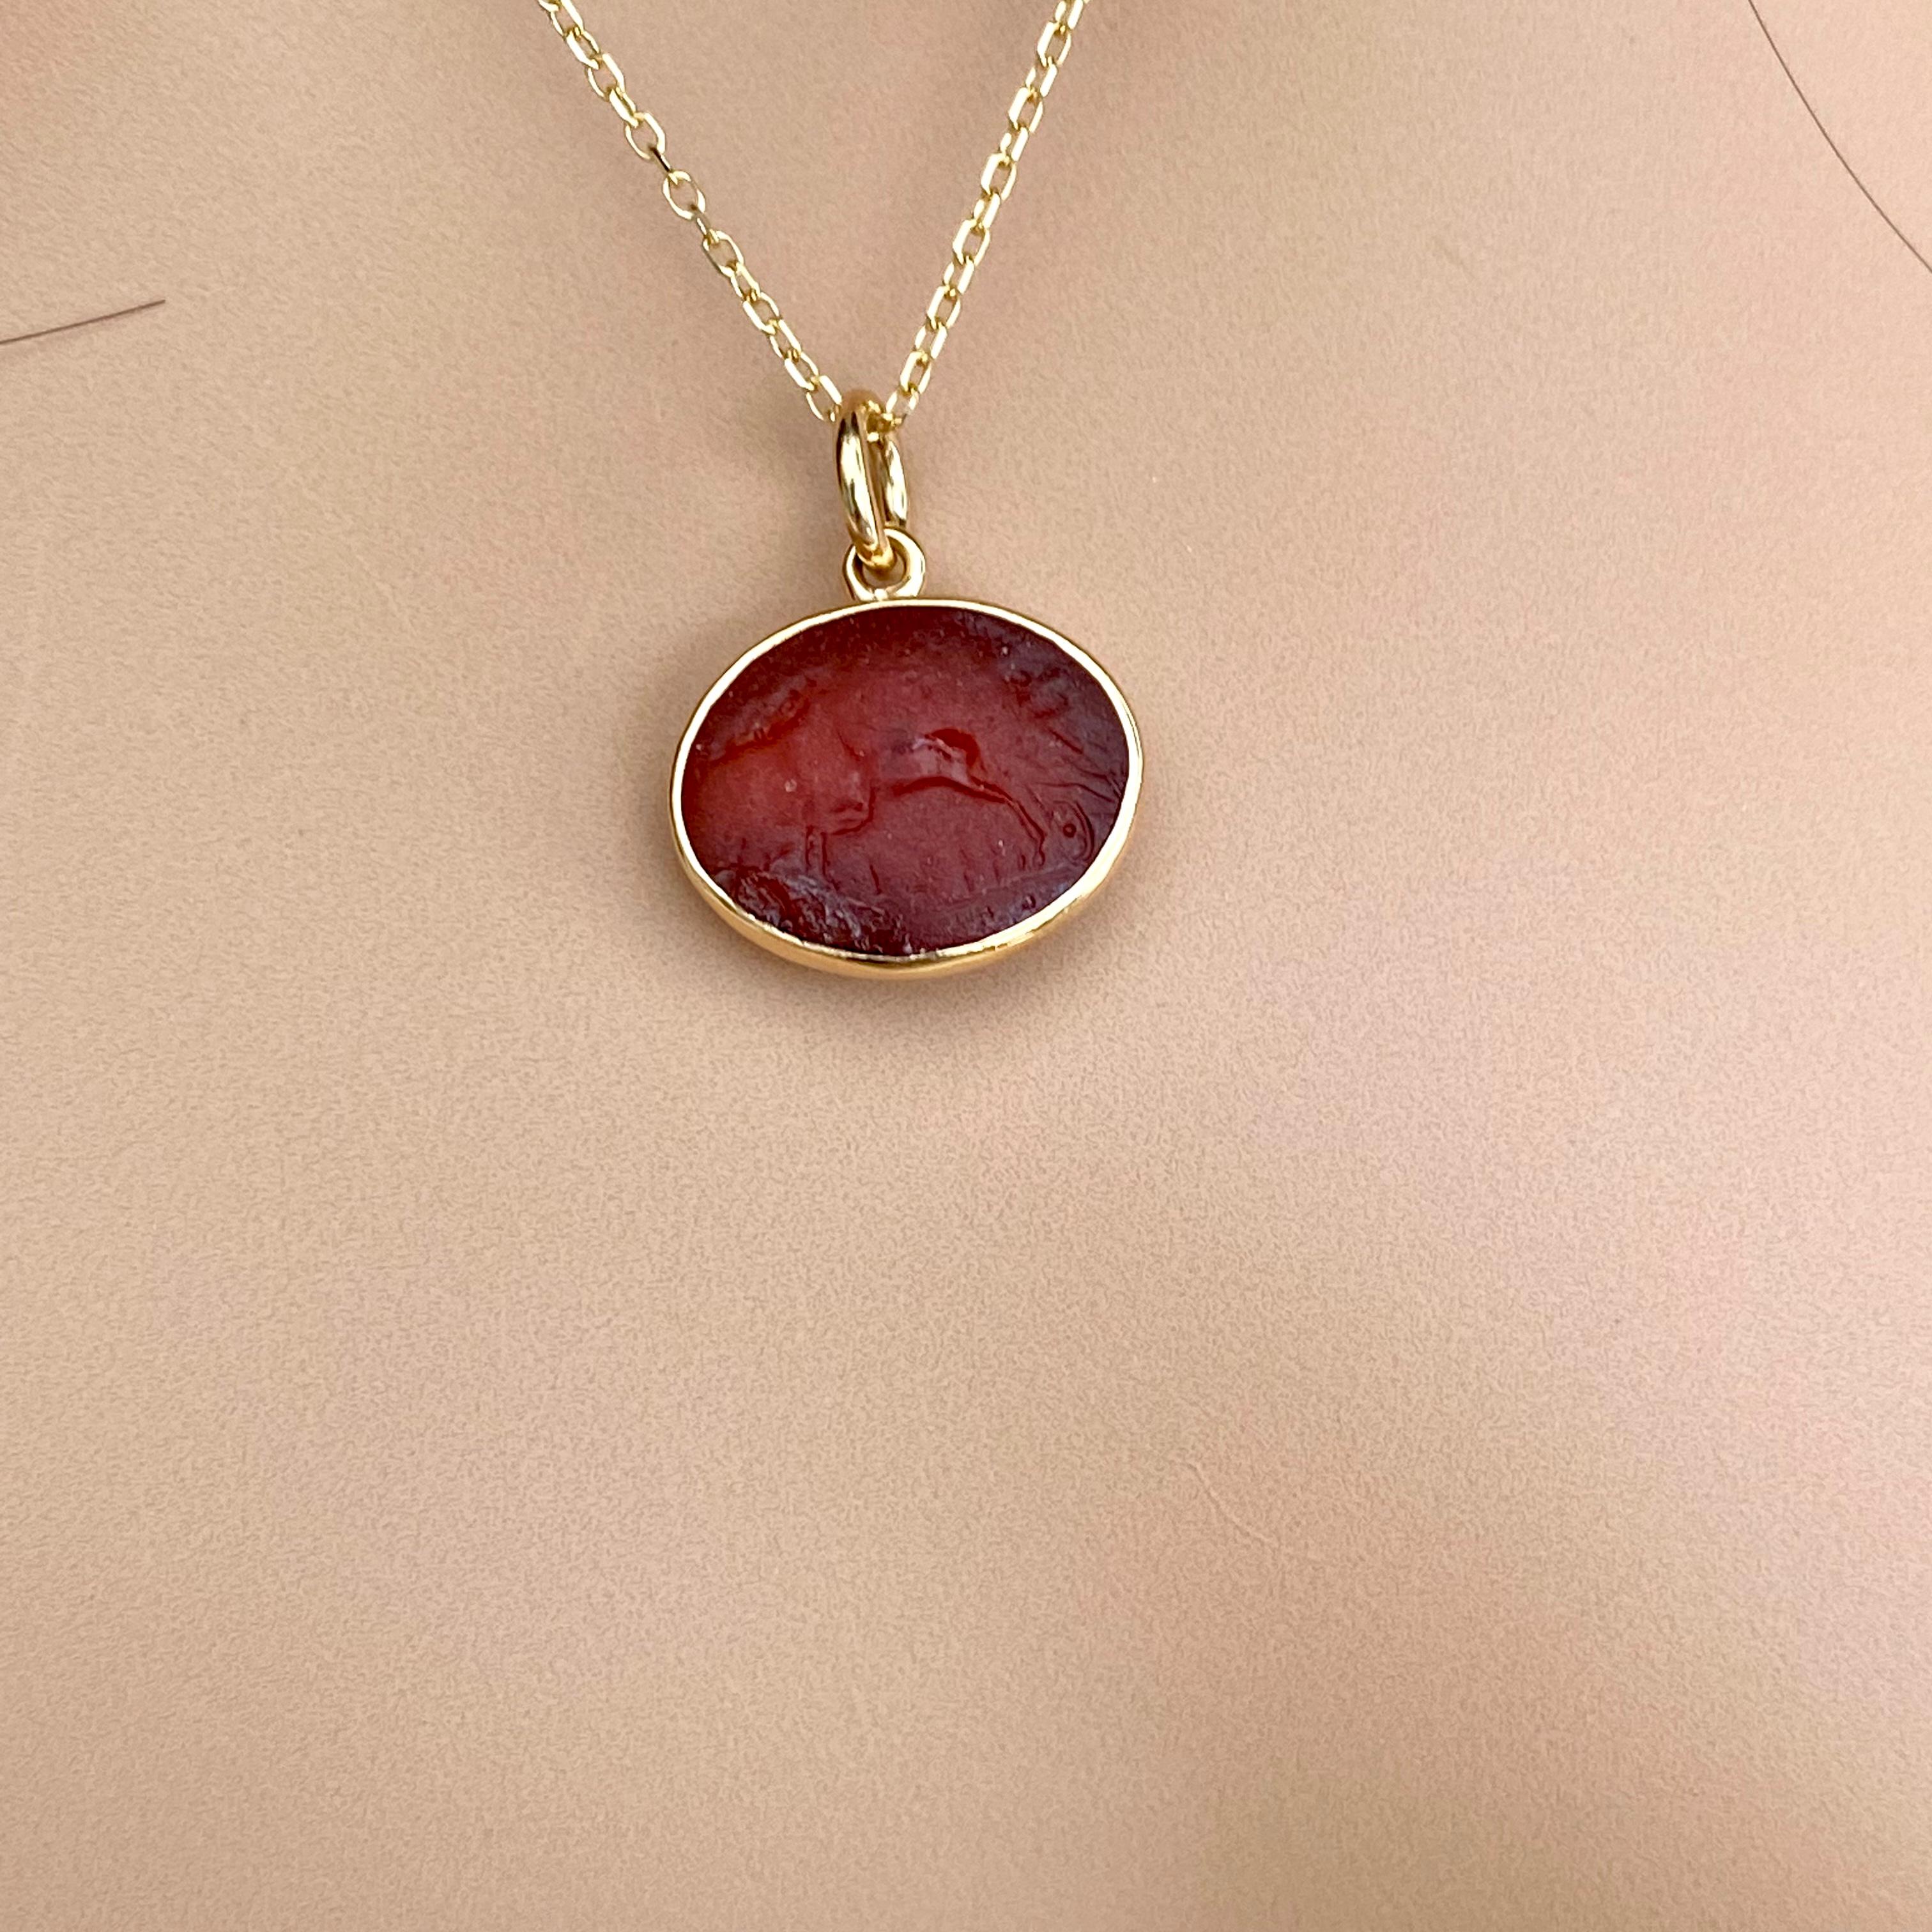 Antique Carved Oval Carnelian Intaglio Depicting a Deer Yellow Gold Pendant 2